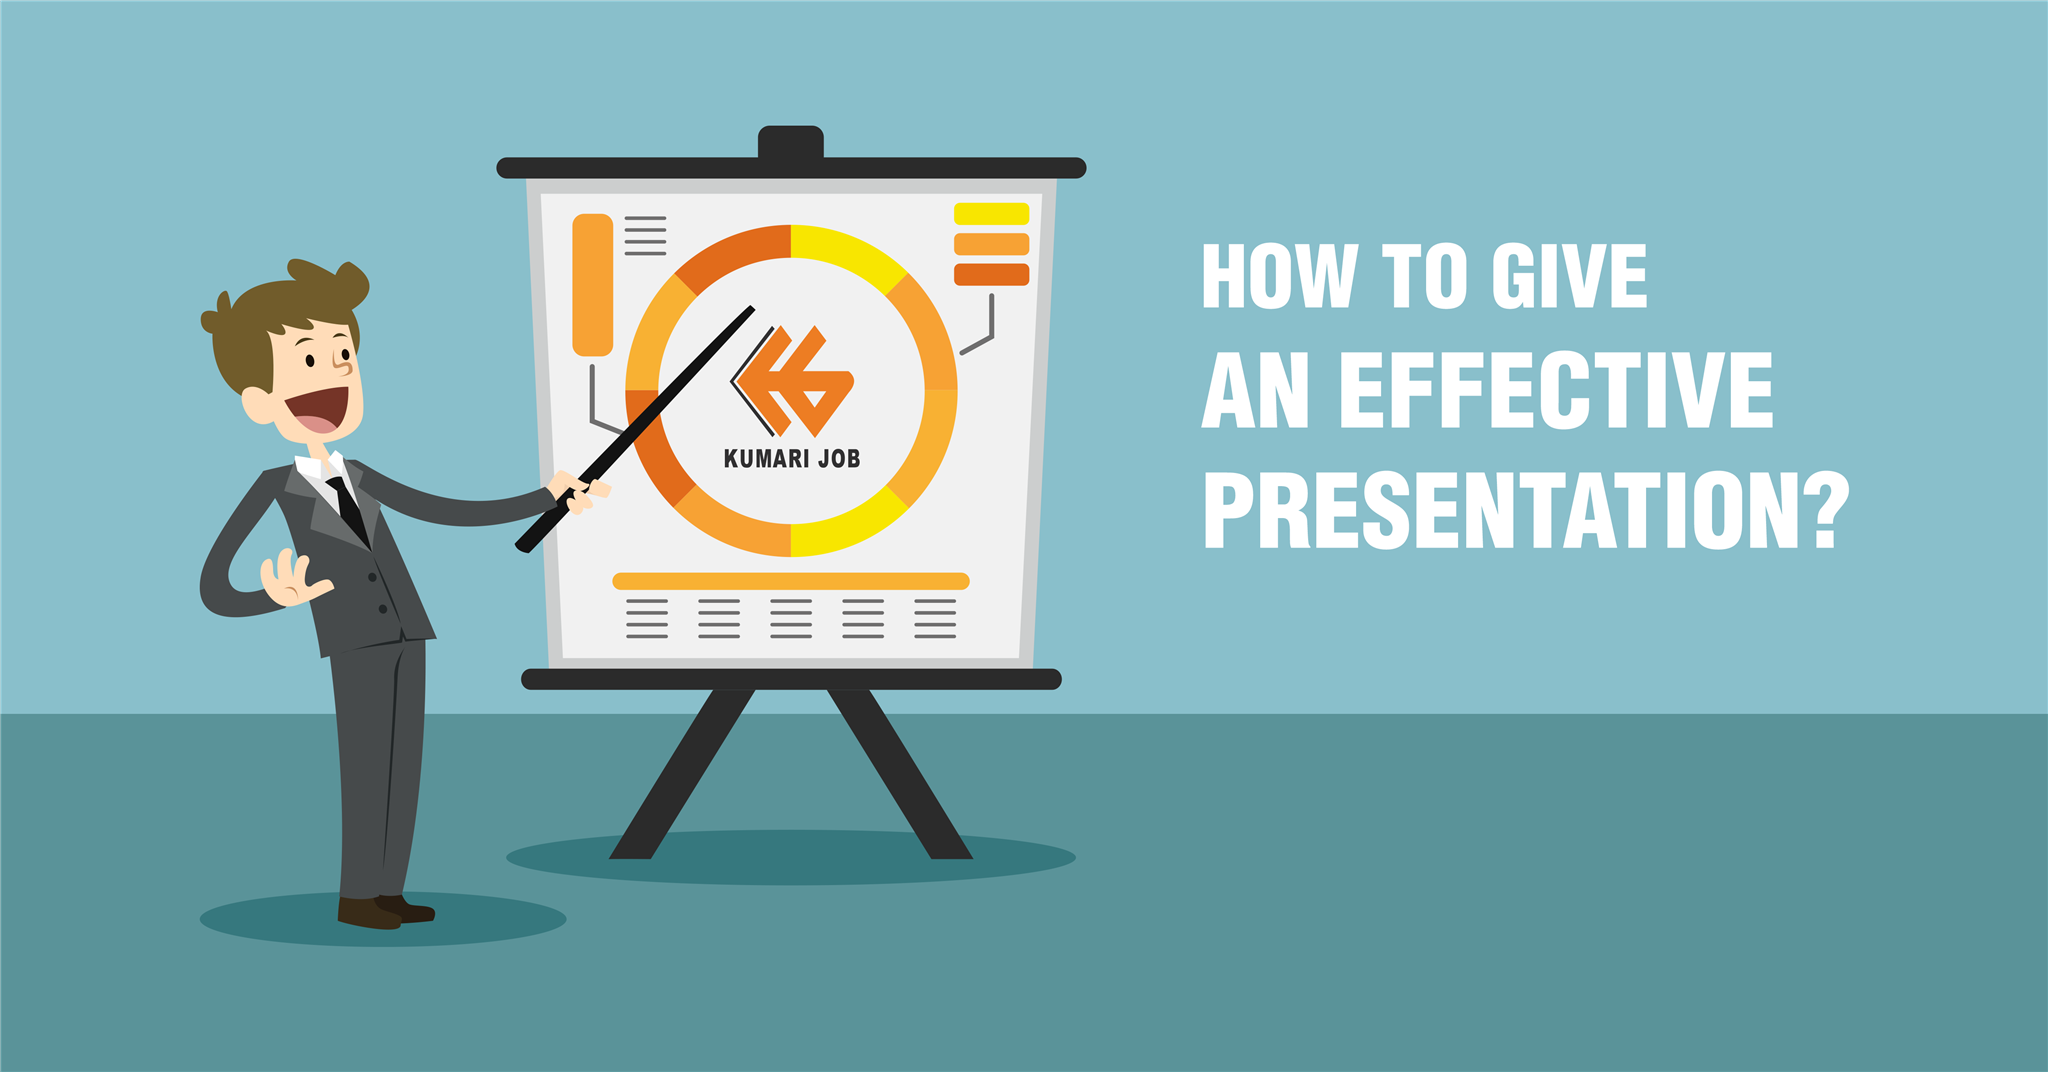 How to give. How to make effective presentation. Making effective presentation. How to give an effective presentation. How to give a presentation.